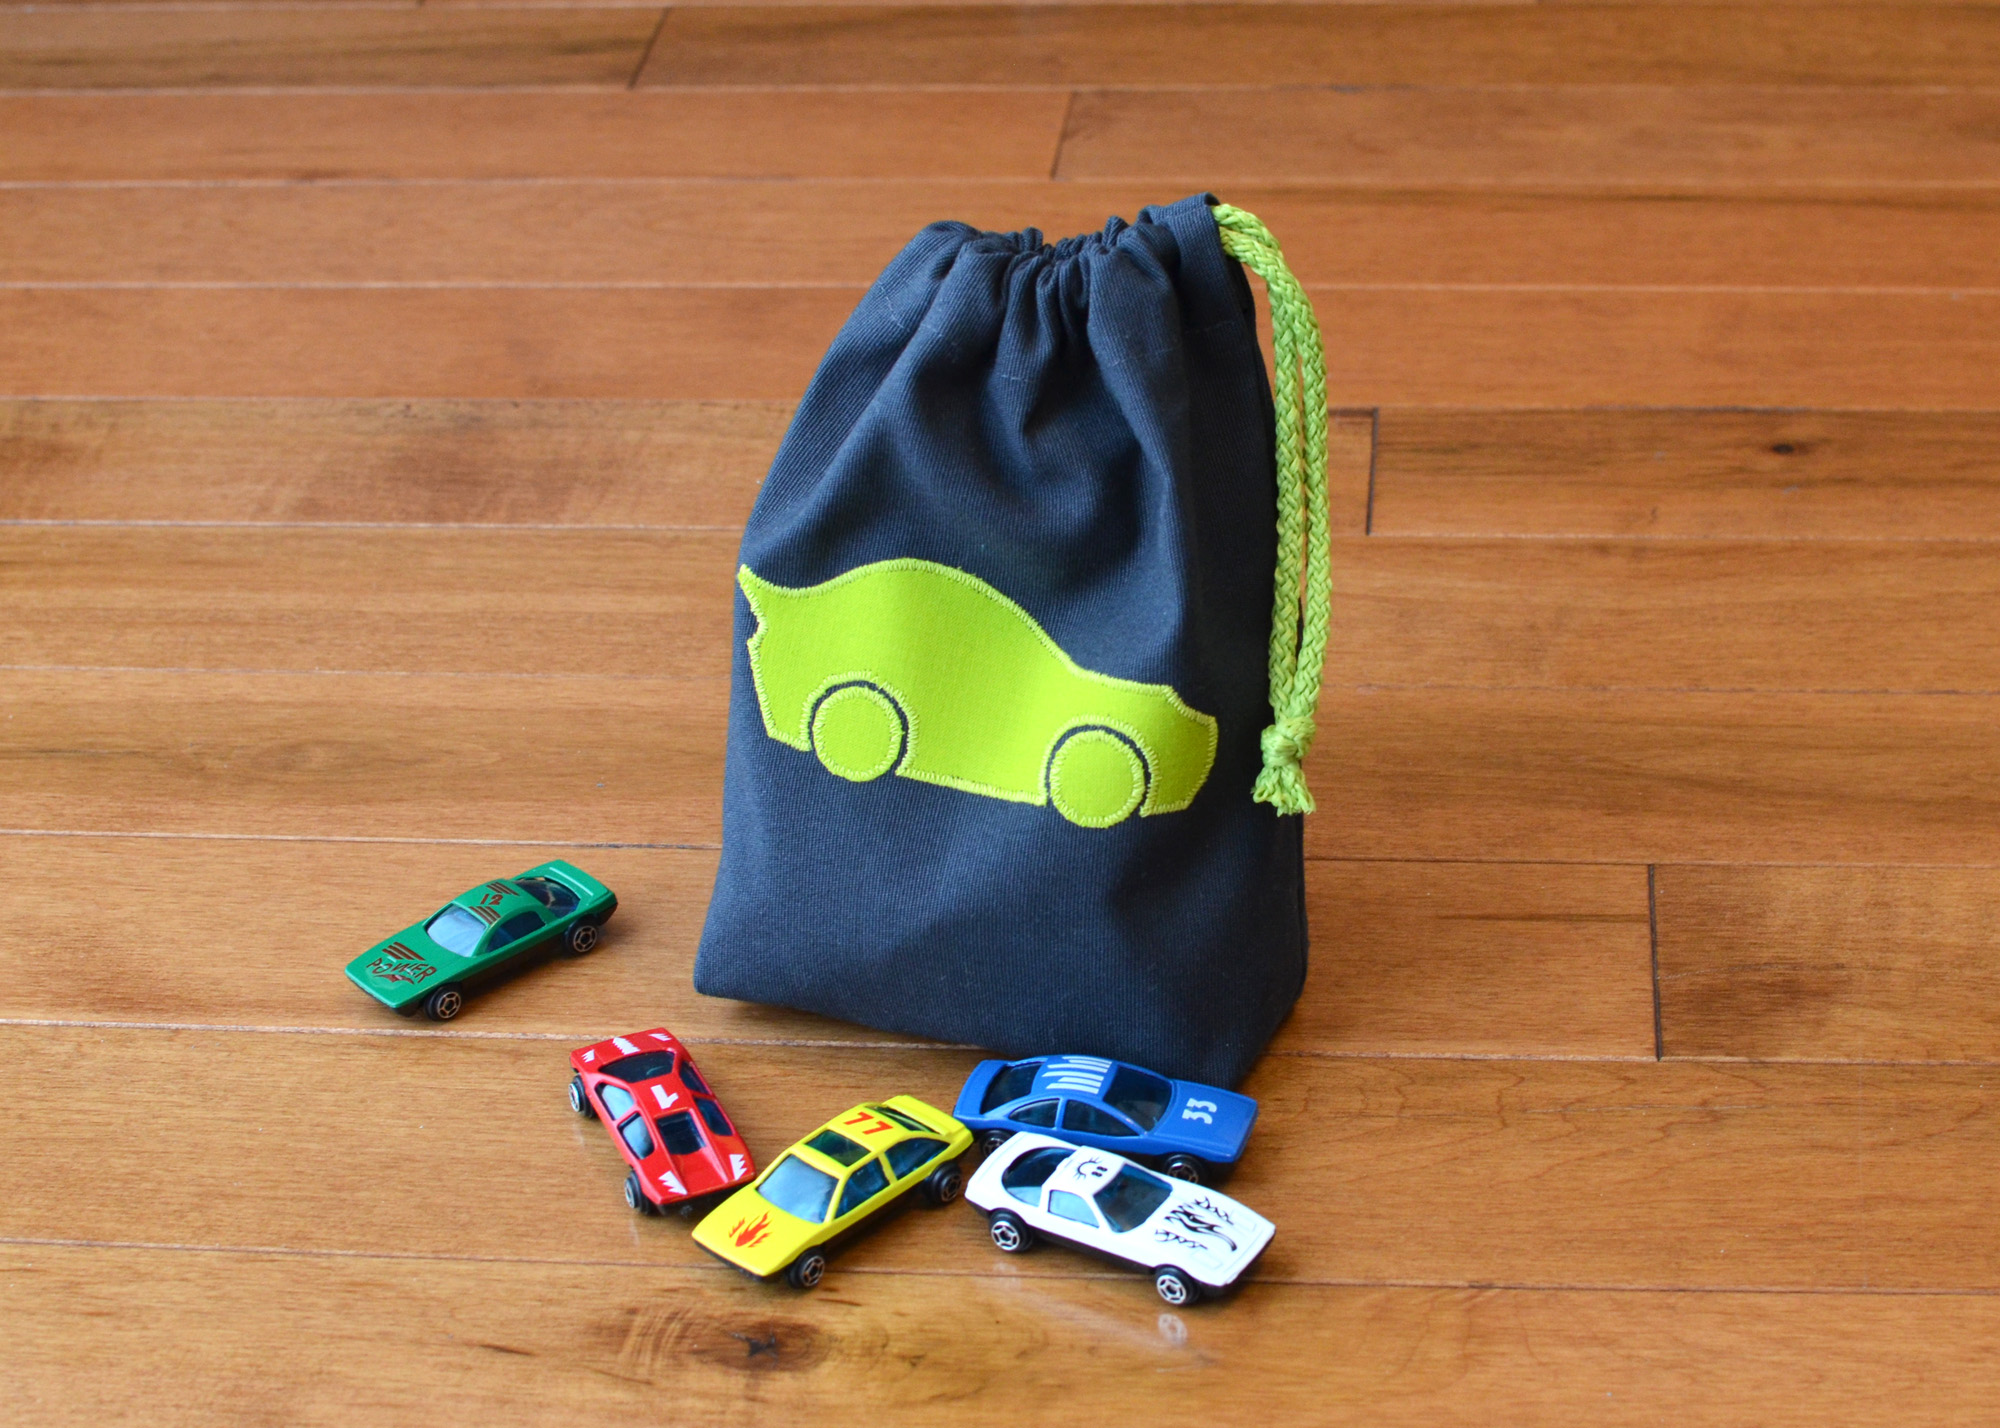 And more toy bags